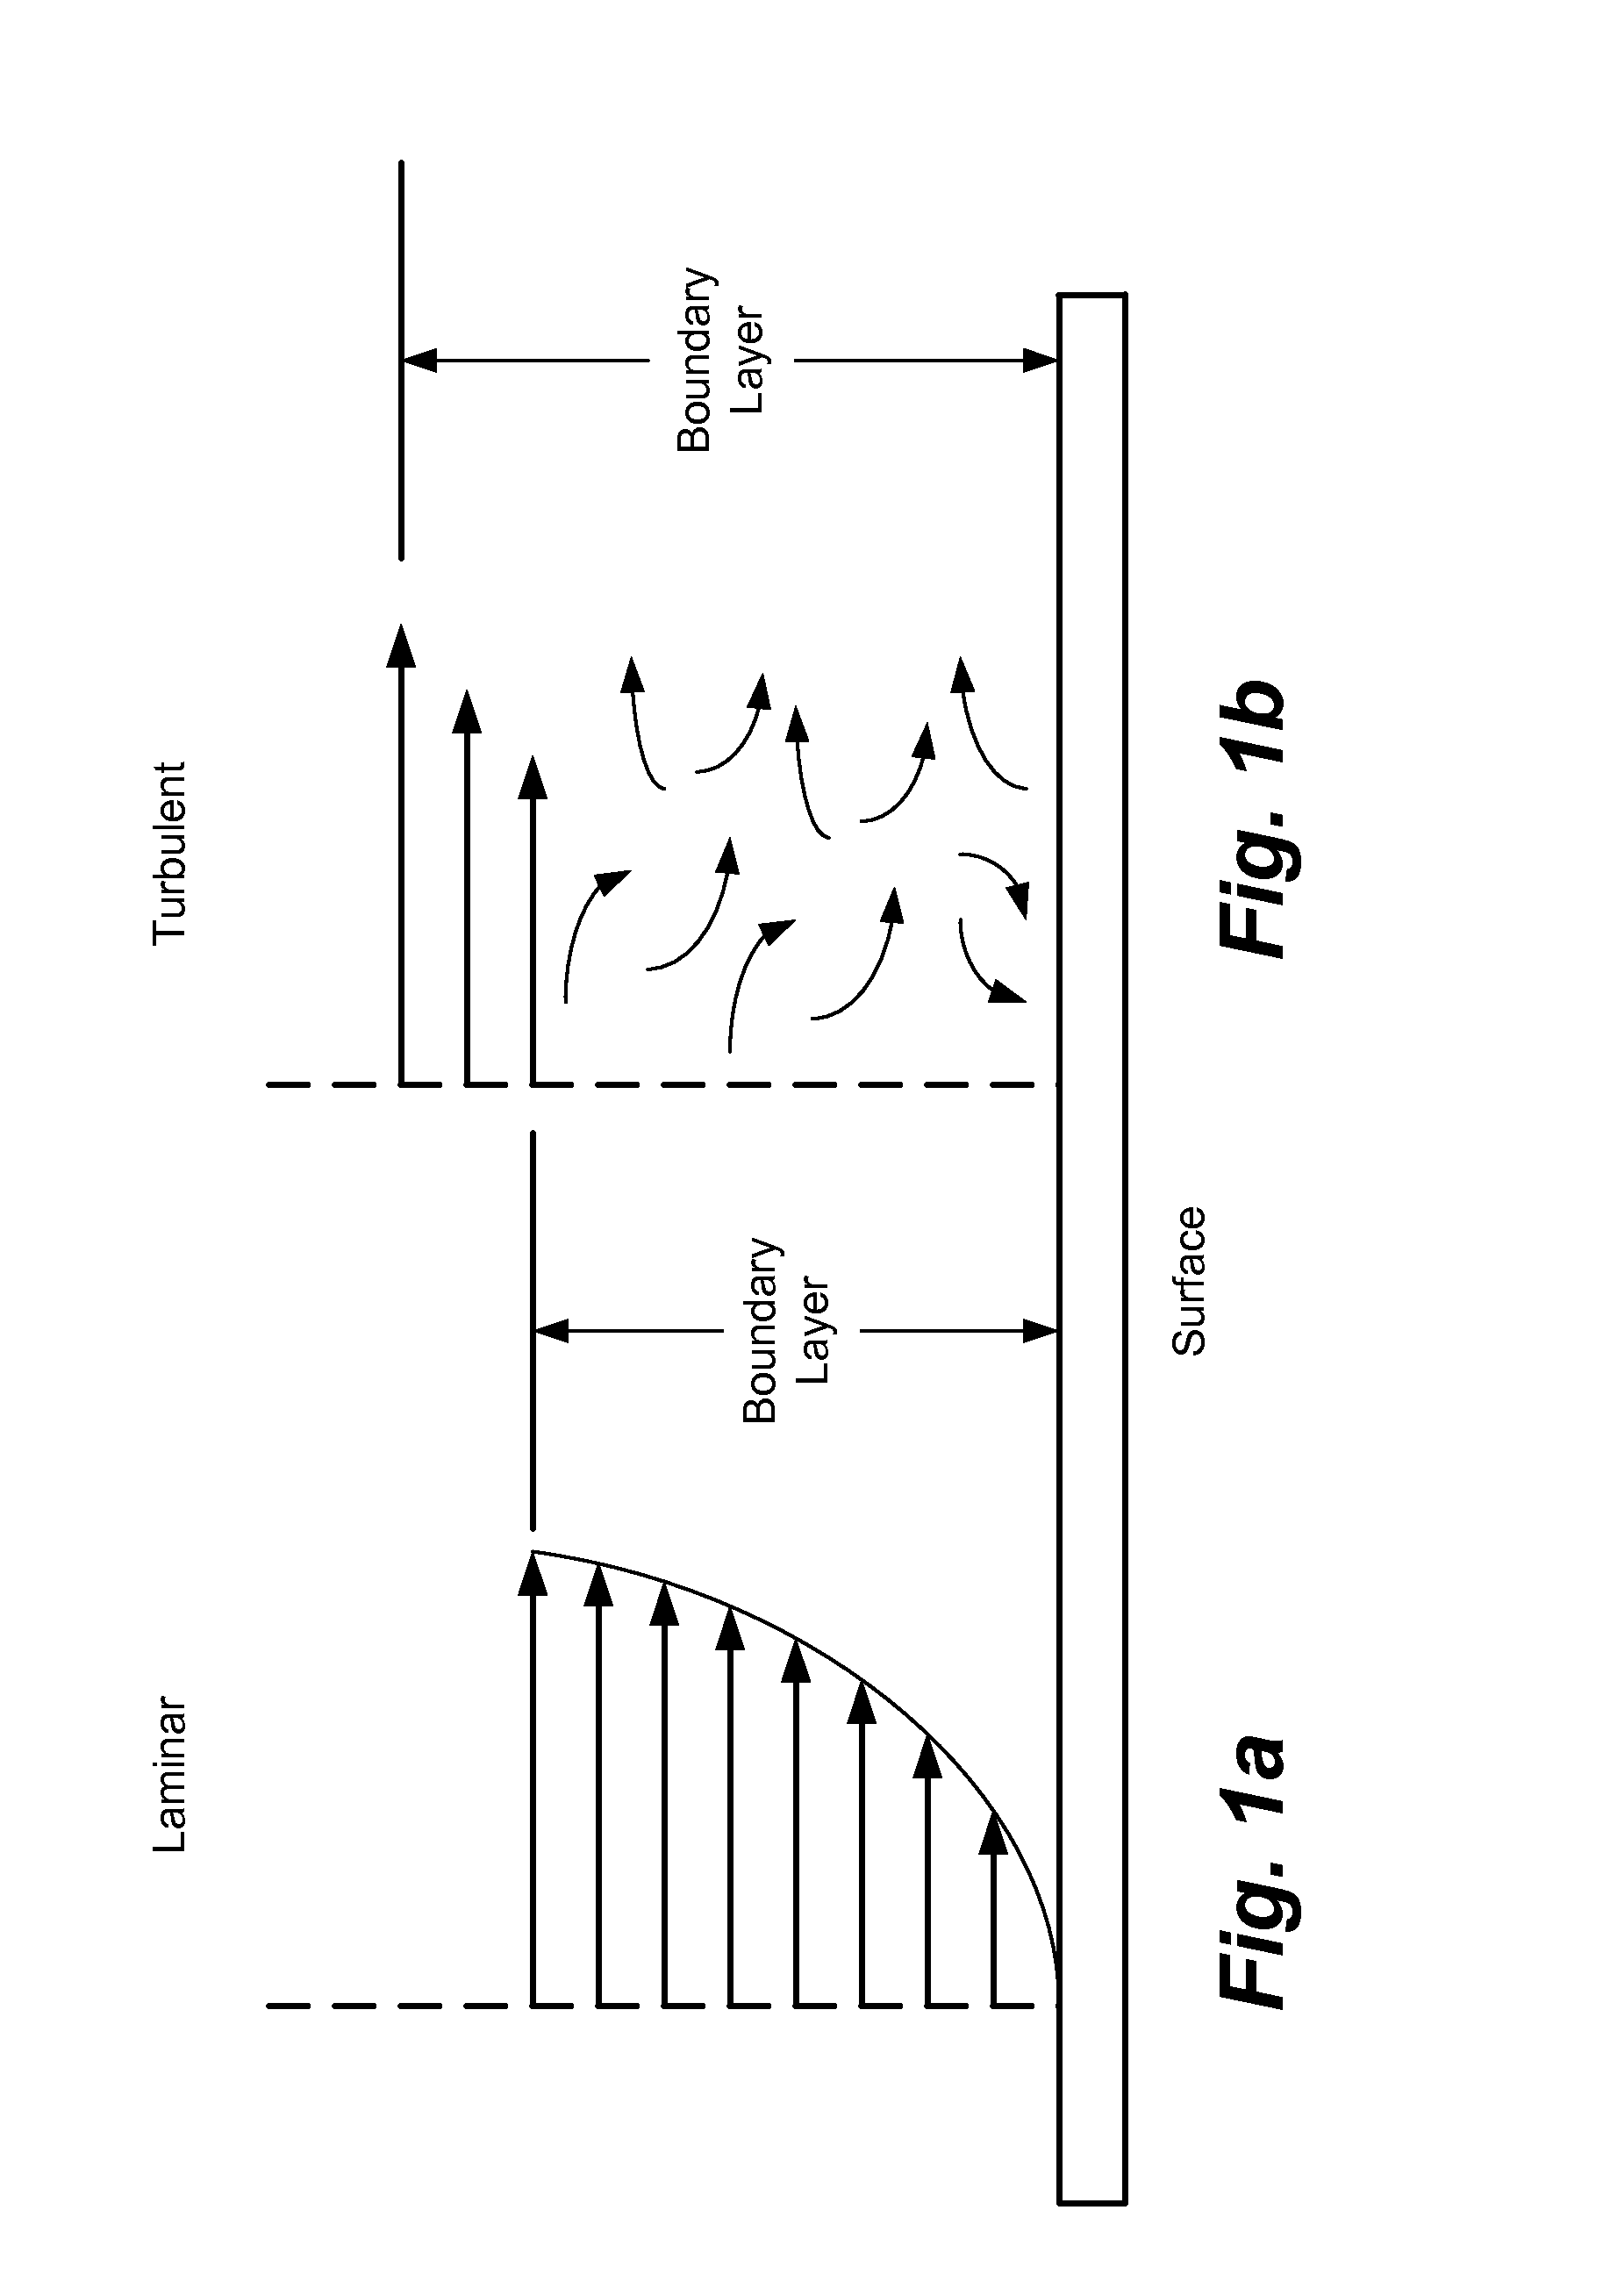 Cabin Pressure Outflow Valve Noise Suppression Devices and Methods